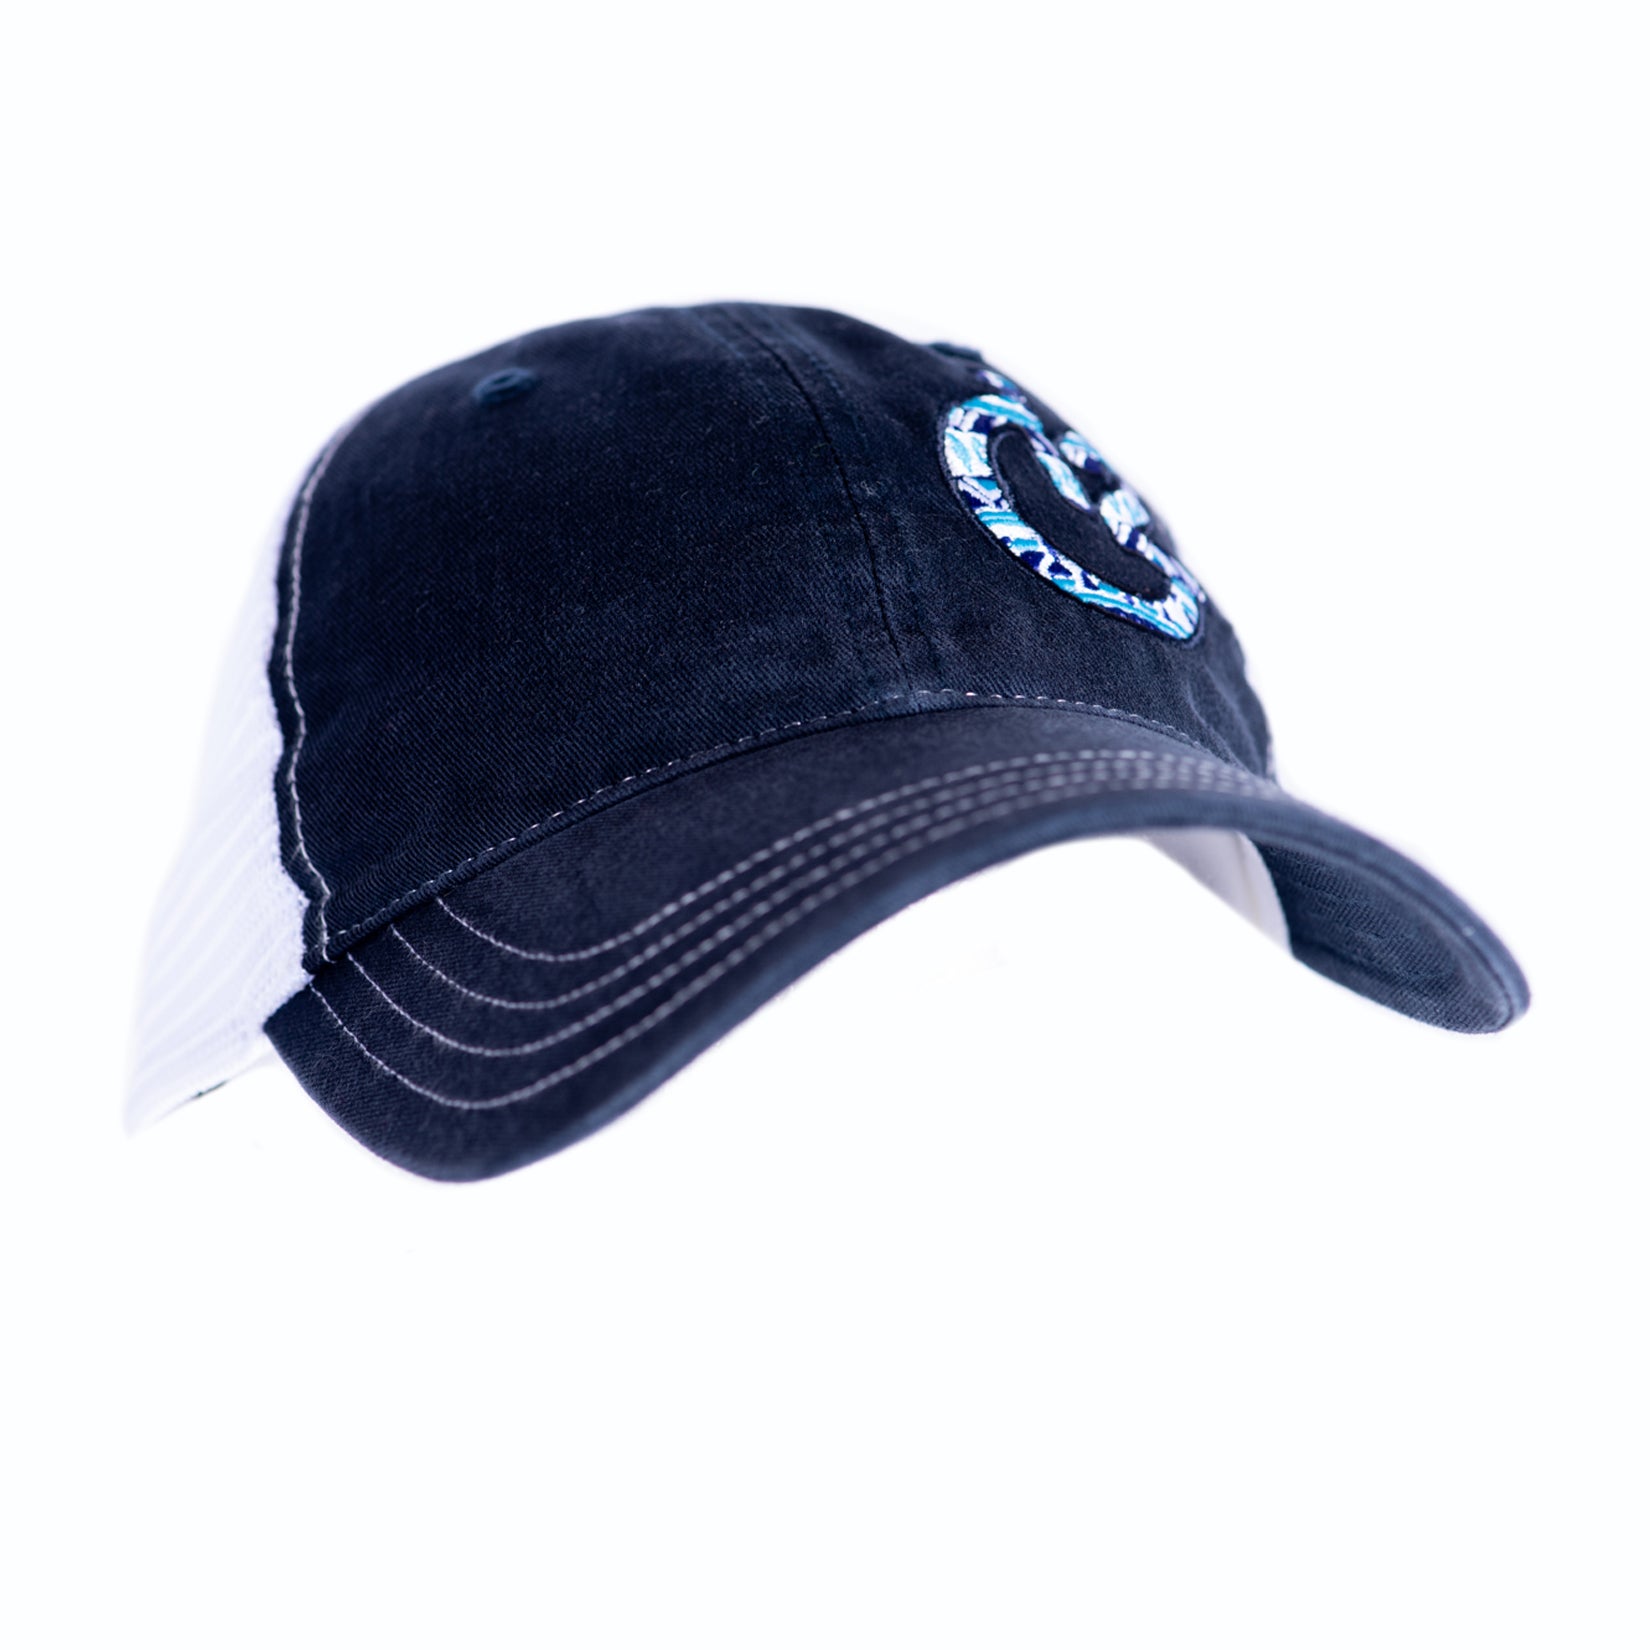 12 Gauge Ranch Aztec Navy and White Low Profile Baseball Hat, Hats, 12 Gauge Ranch, 12 Gauge Ranch Ranch  12 Gauge Ranch